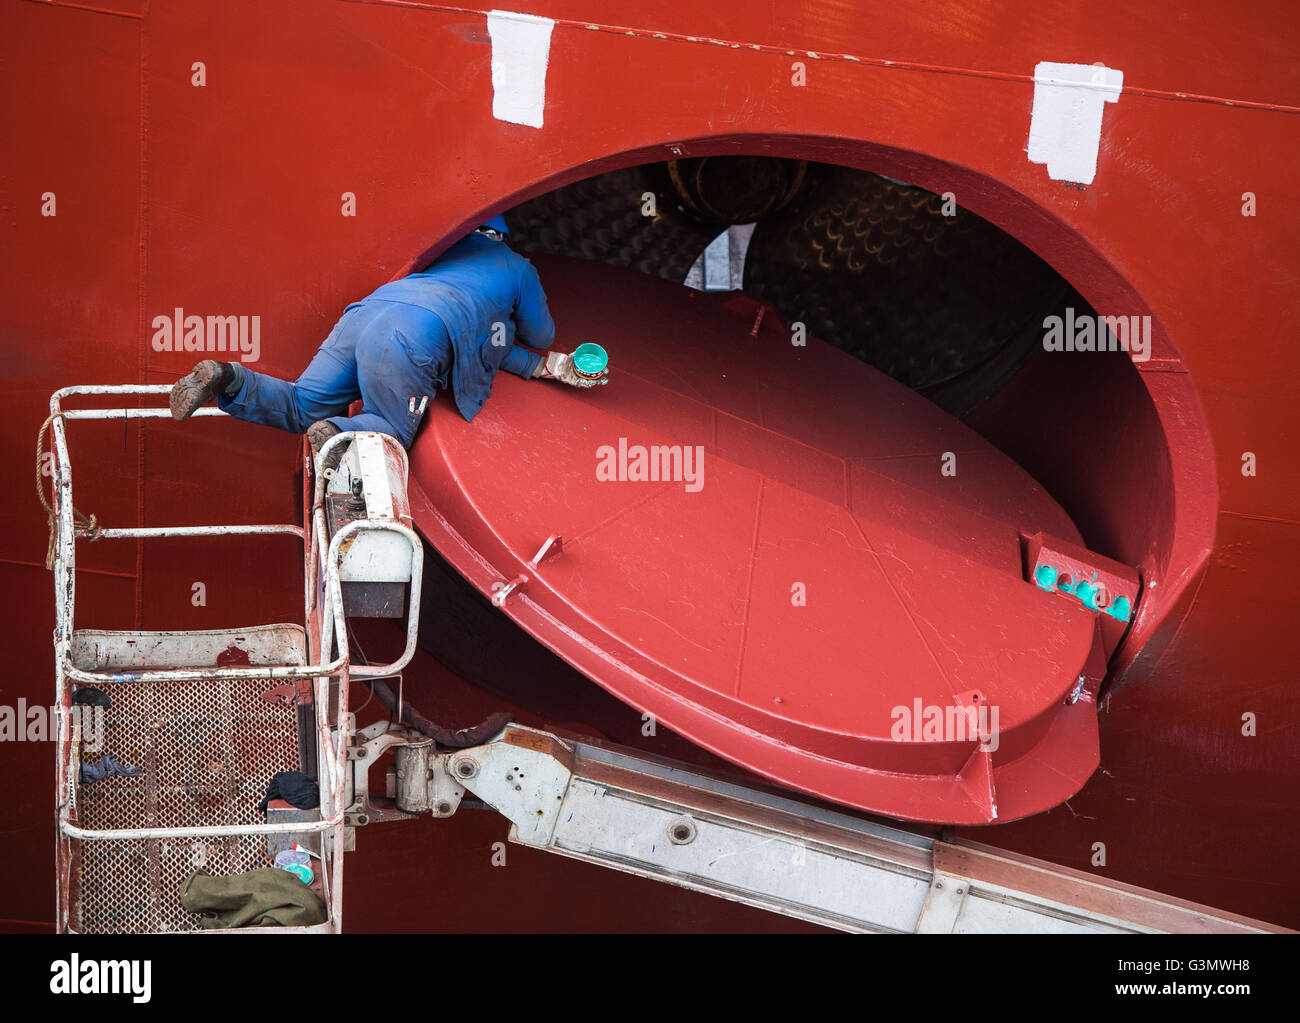 Hamburg, Germany. 14th June, 2016. A man working on the bow thruster of the 'Queen Mary 2' in the dry dock of Blohm + Voss in Hamburg, Germany, 14 June 2016. After modernisation works in the dockyard, the cruise ship will sail again on 17 June 2016. PHOTO: LUKAS SCHULZE/dpa/Alamy Live News Stock Photo